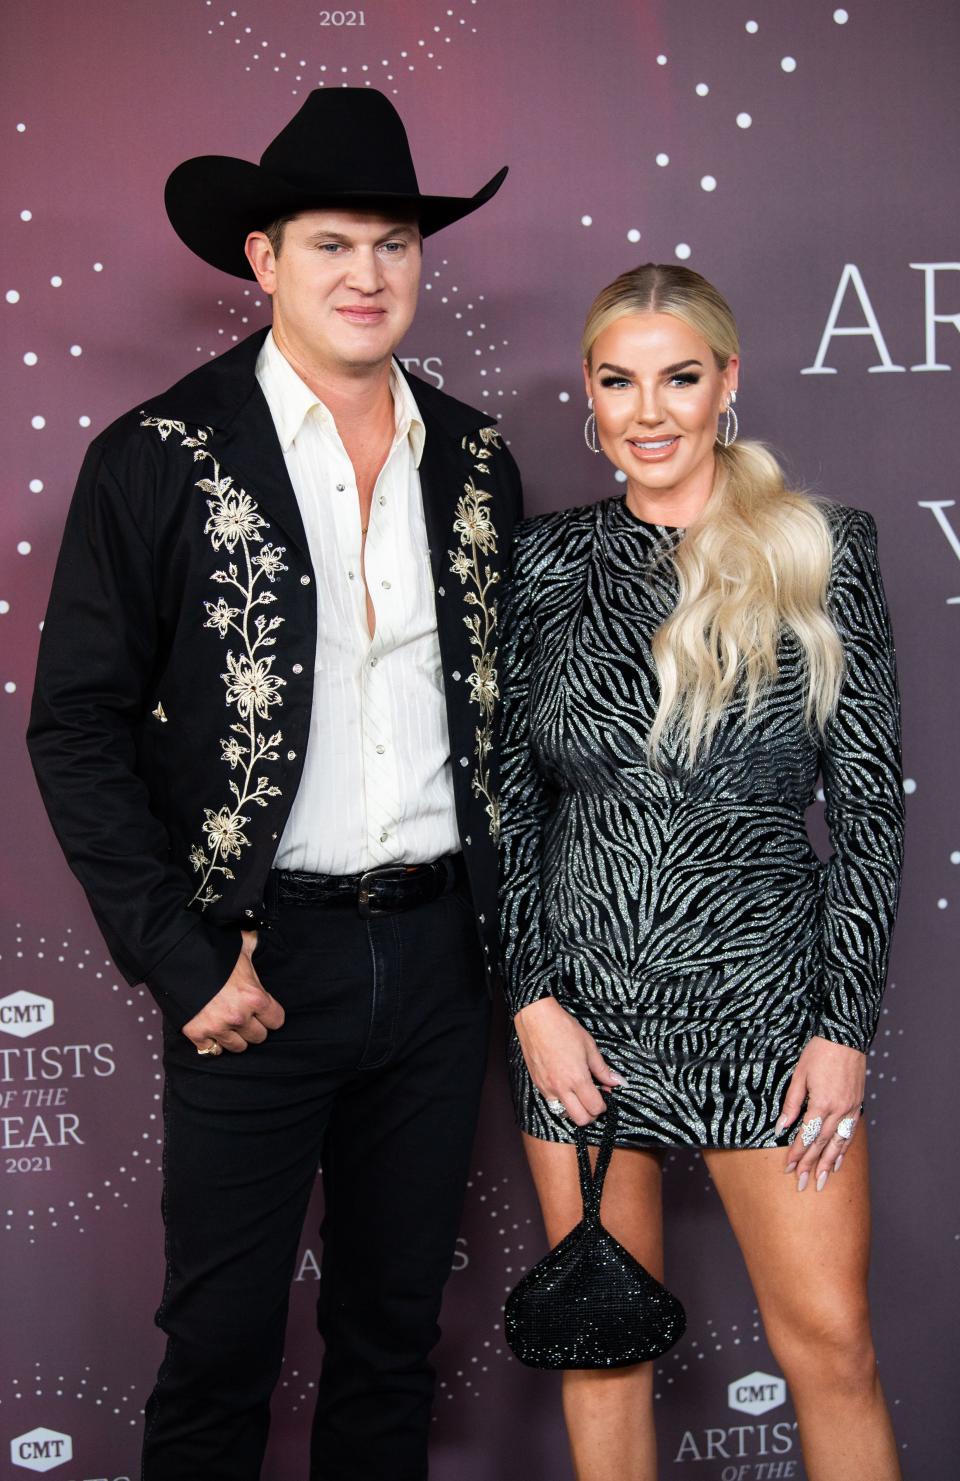 Jon Pardi and his wife Summer Duncan pose together during the CMT Red Carpet event at Schermerhorn Symphony Center in Nashville, Tenn., Wednesday, Oct. 13, 2021. 